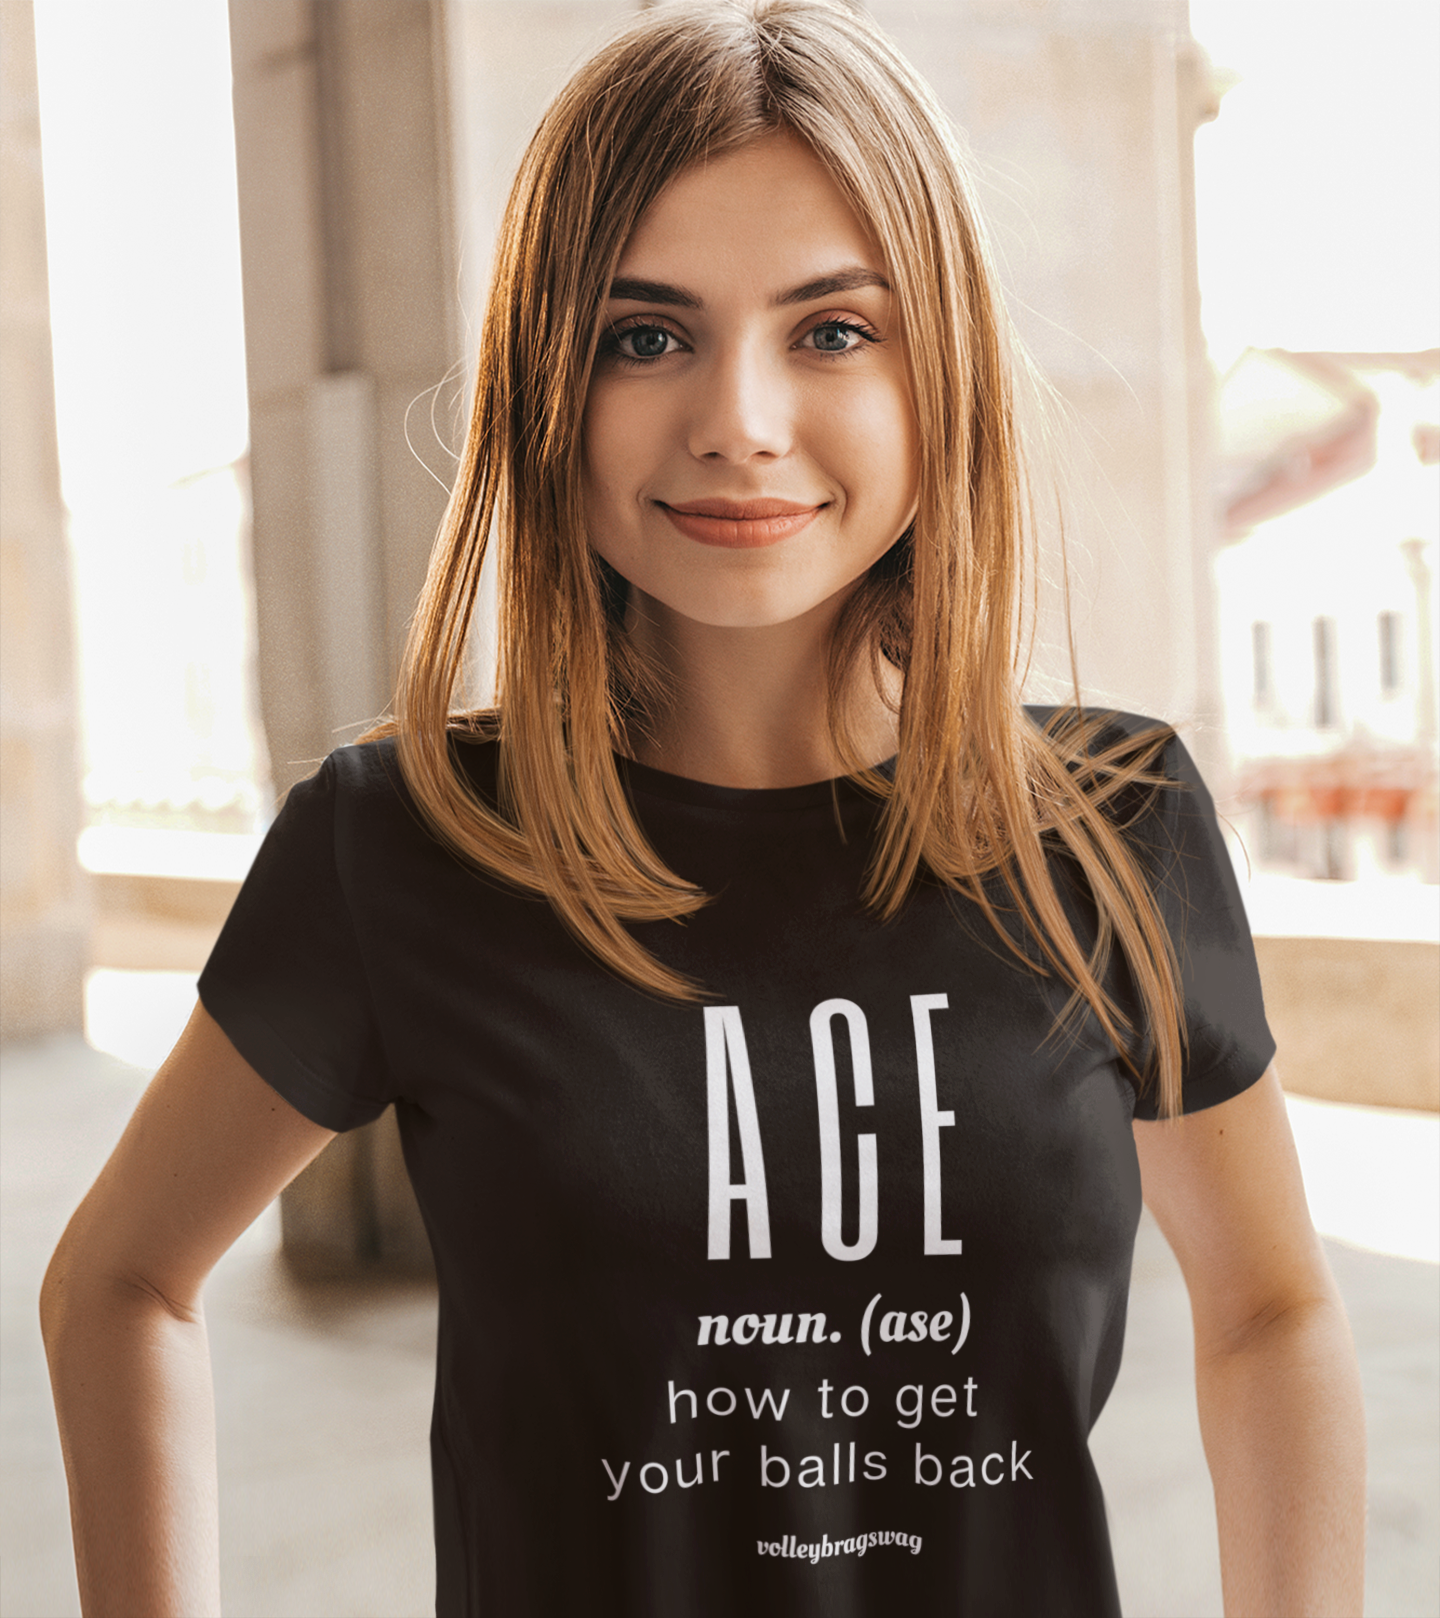 ACE (noun) How To Get Your Balls Back shirt by Coach April is one of the funny volleyball t shirt quotes featured in the Volleybragswag Got Balls Collection  available on Amazon.